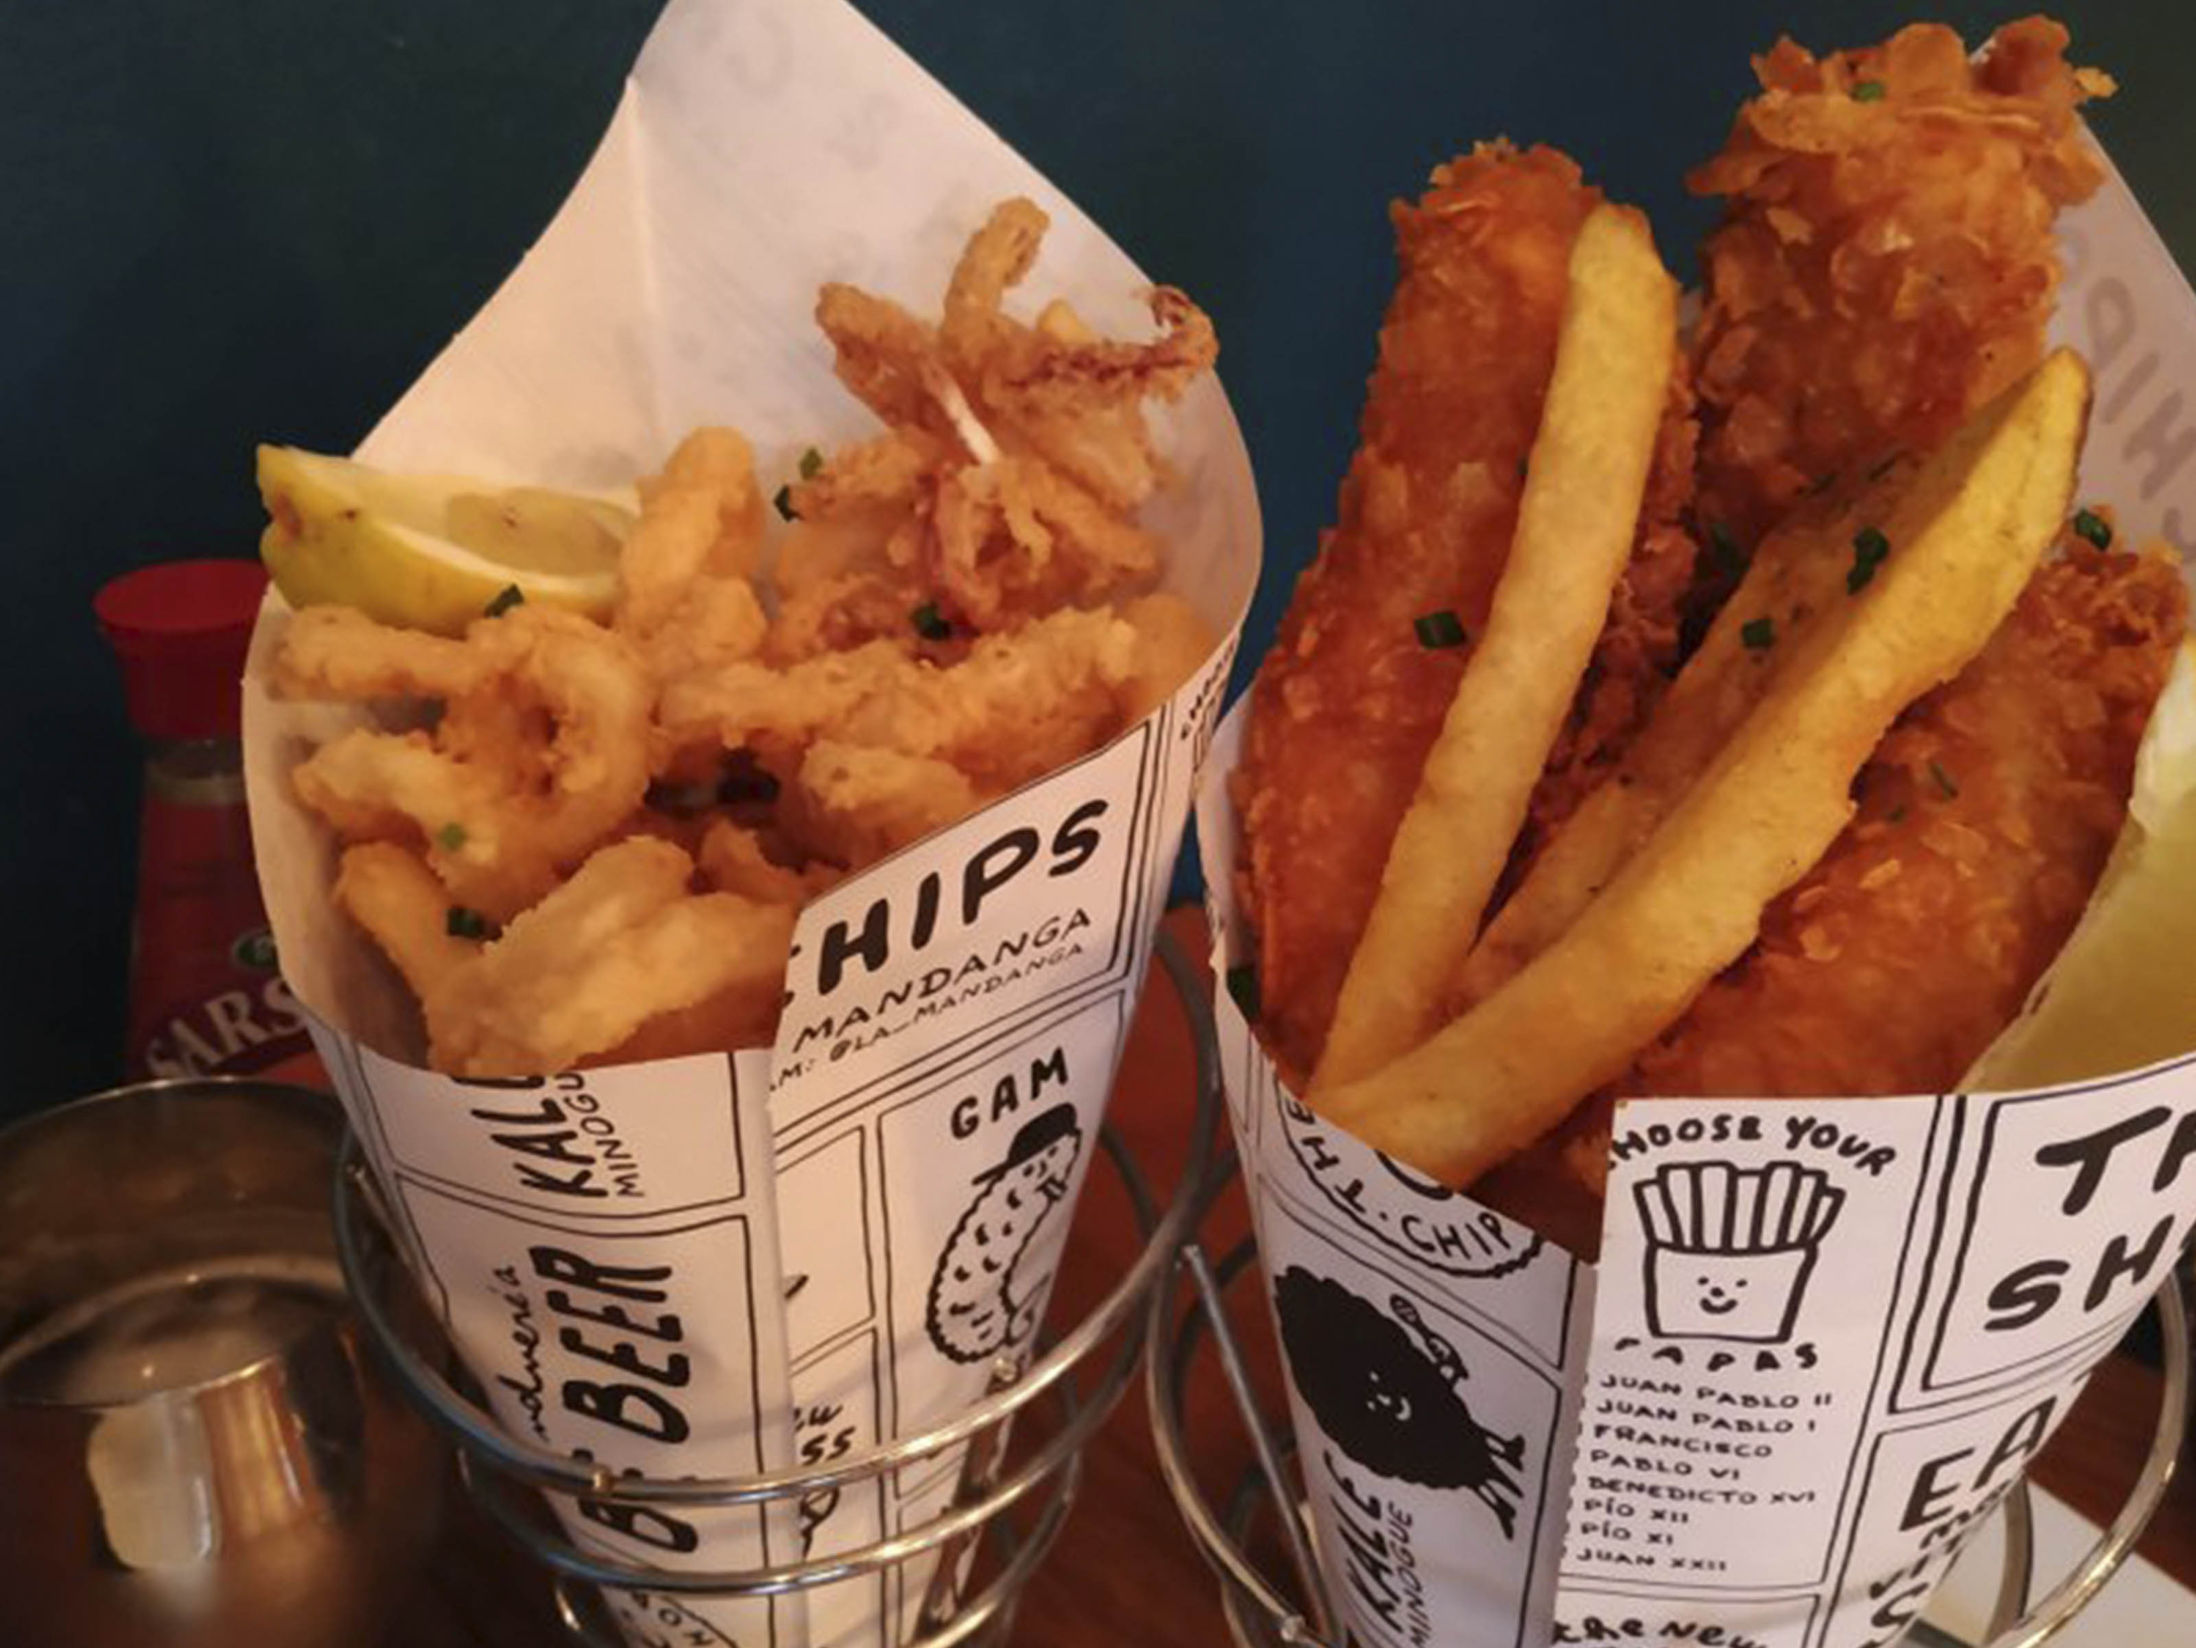 Best Restaurants in Barcelona - The Fish and Chips Shop